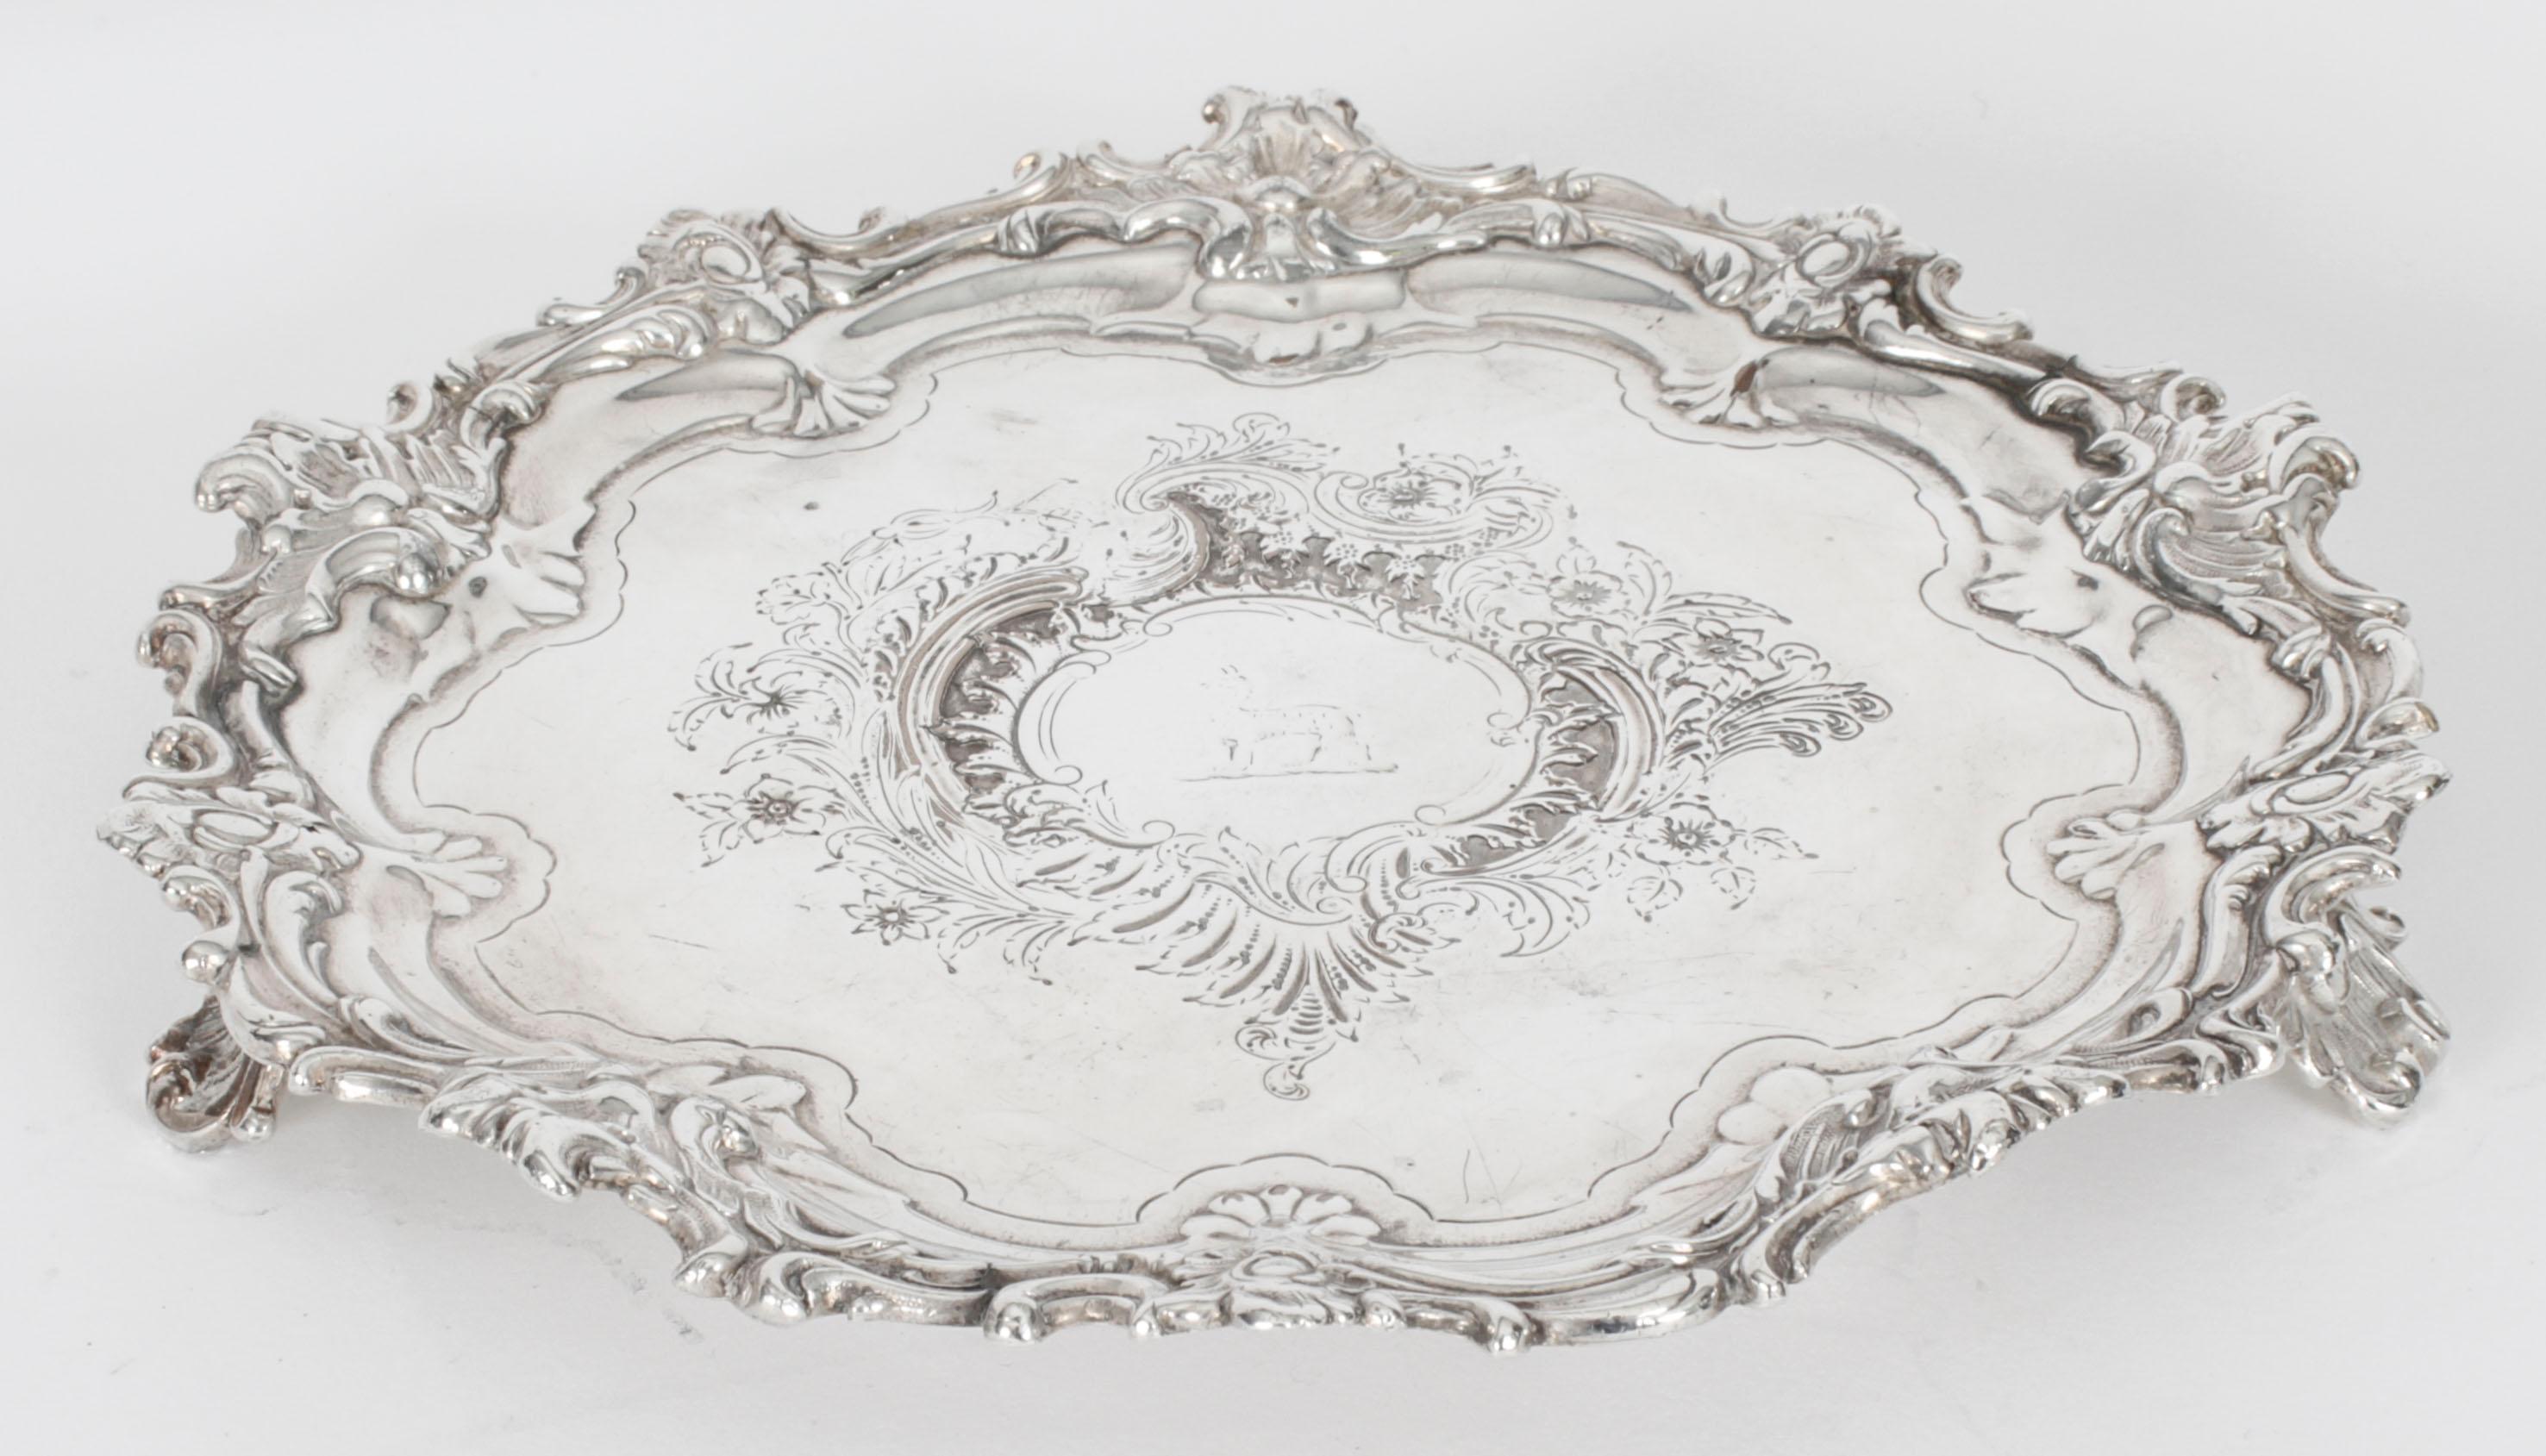 This is an exquisite English antique old Sheffield Plate salver bearing the makers mark ( a hand) for Smith, Tate, Nicholson and Holult, circa 1810 in date.
 
The elegant raised pie crust border shaped salver features hand chased foliate engraving